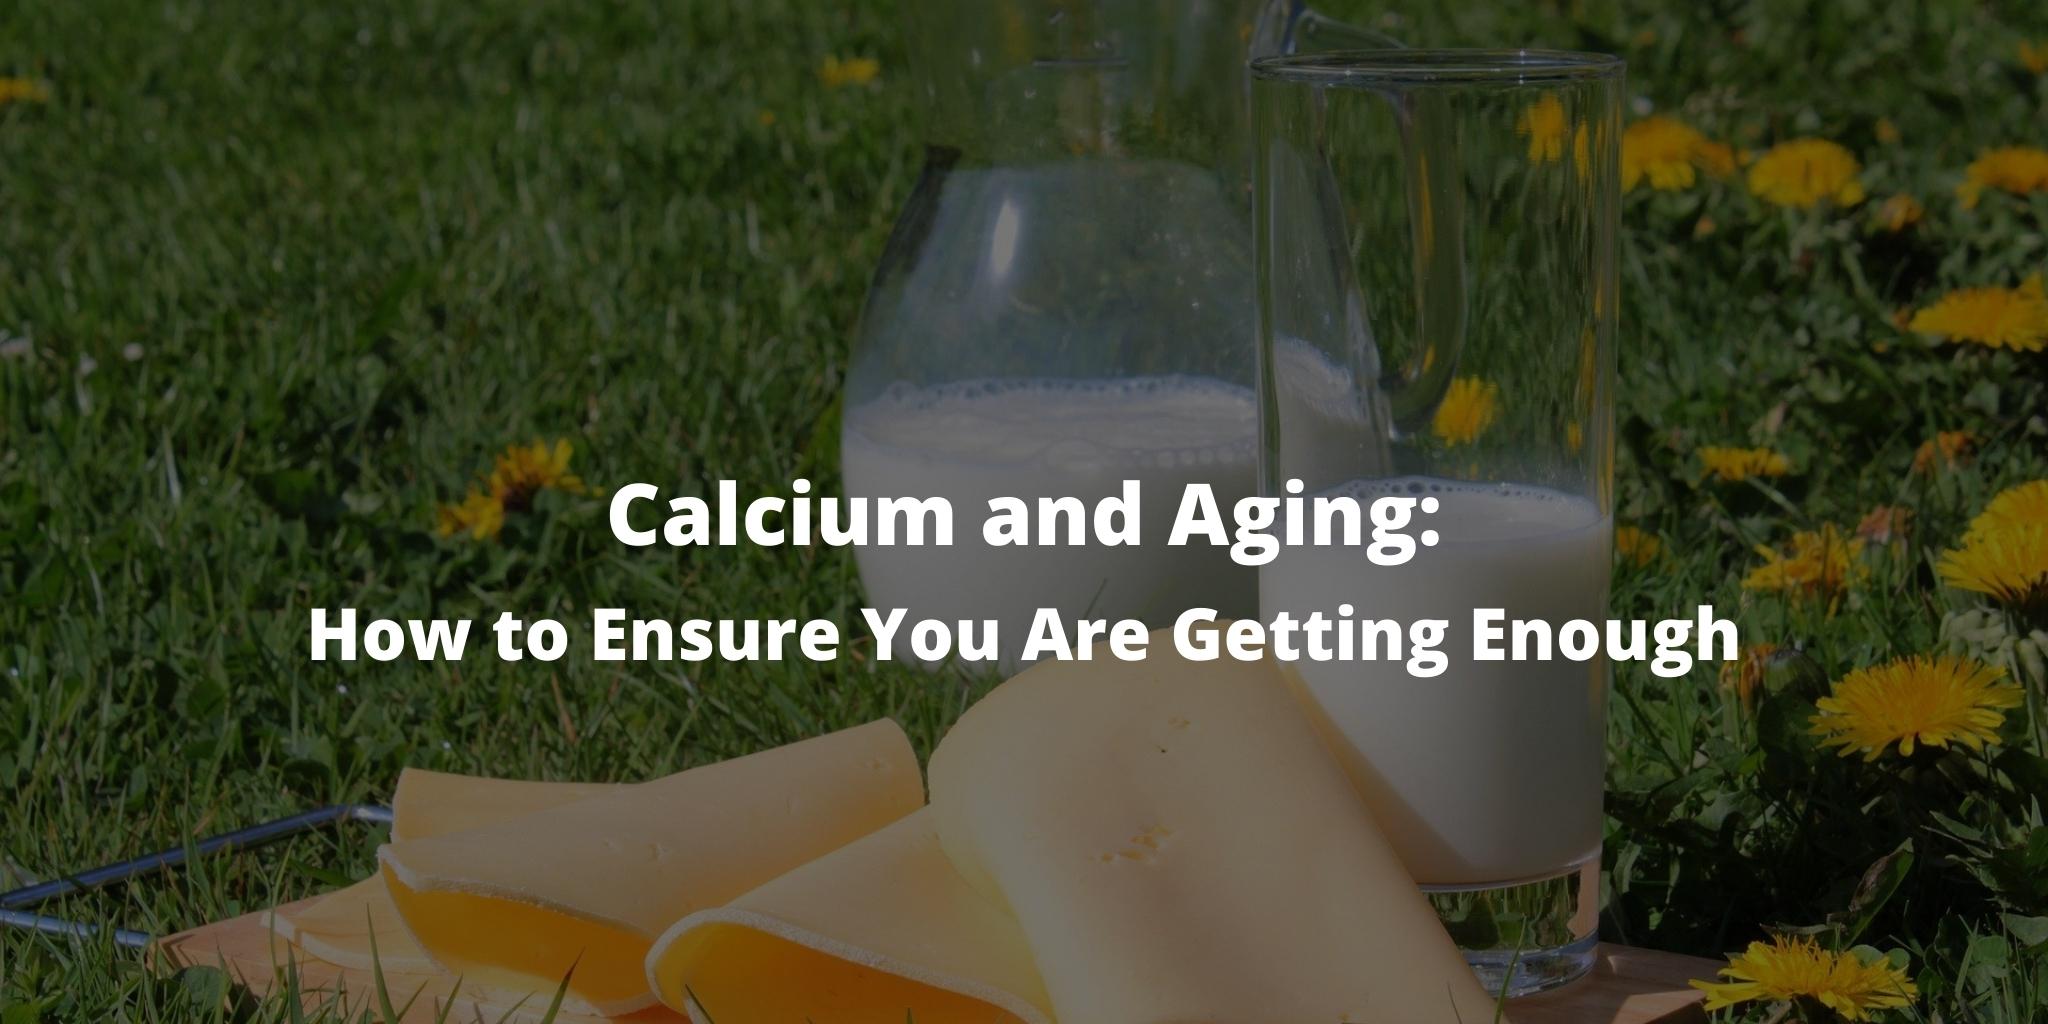 Calcium and Aging: How to Ensure You Are Getting Enough